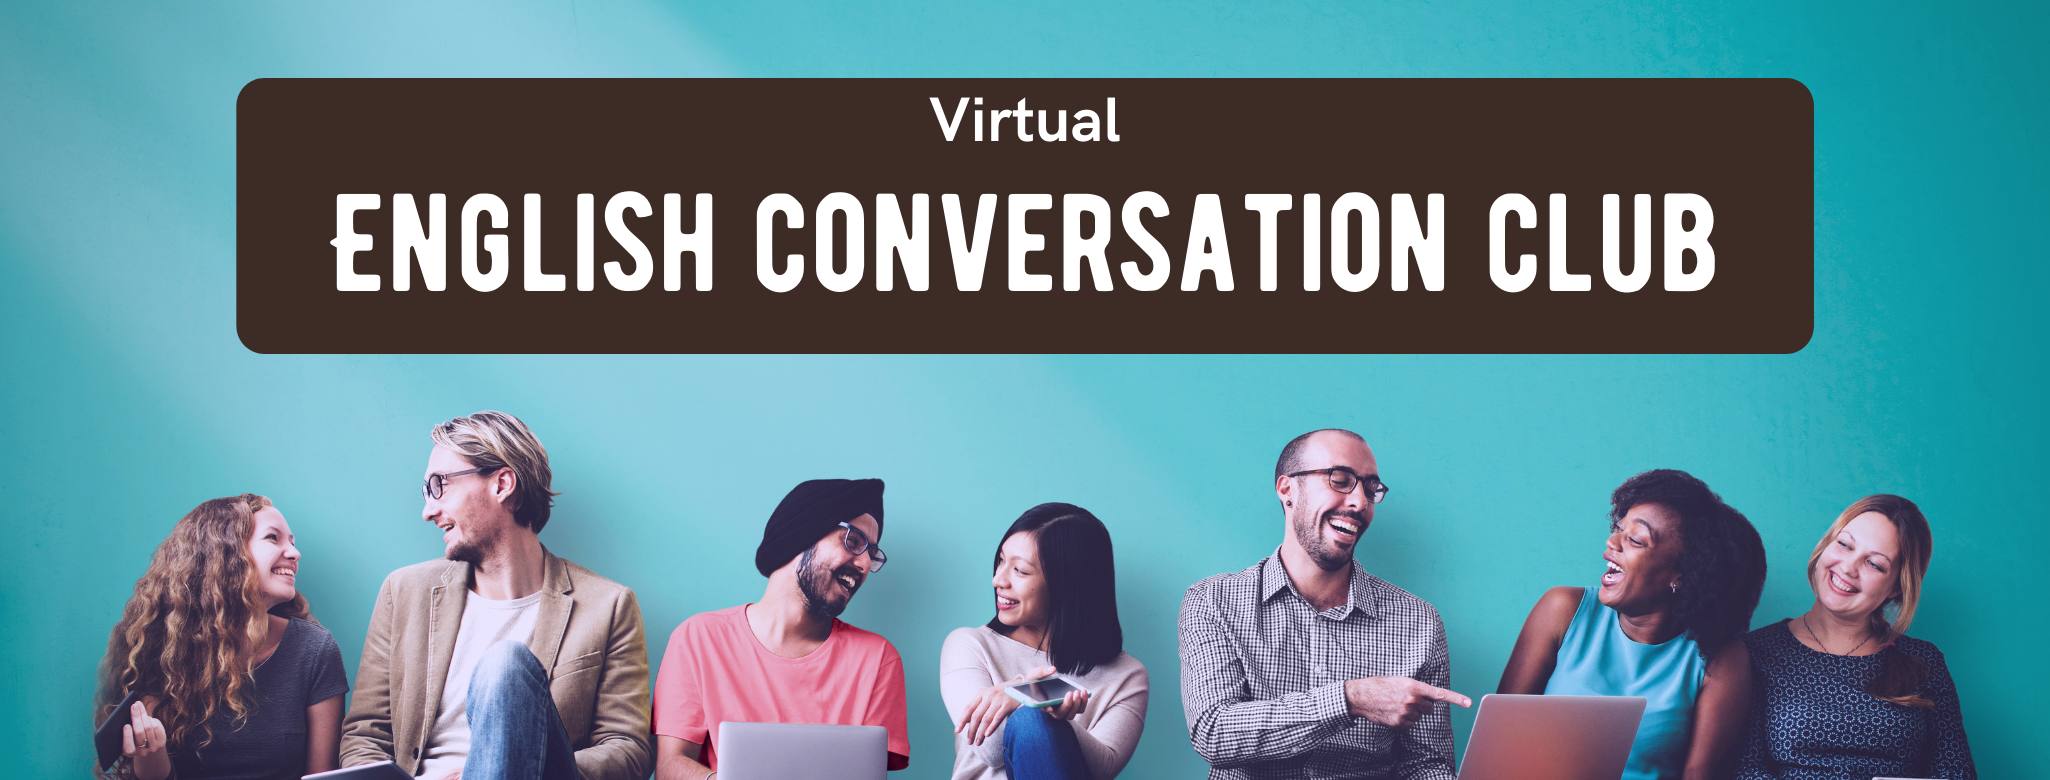 A diverse group of people sit beneath the English Conversation Club logo